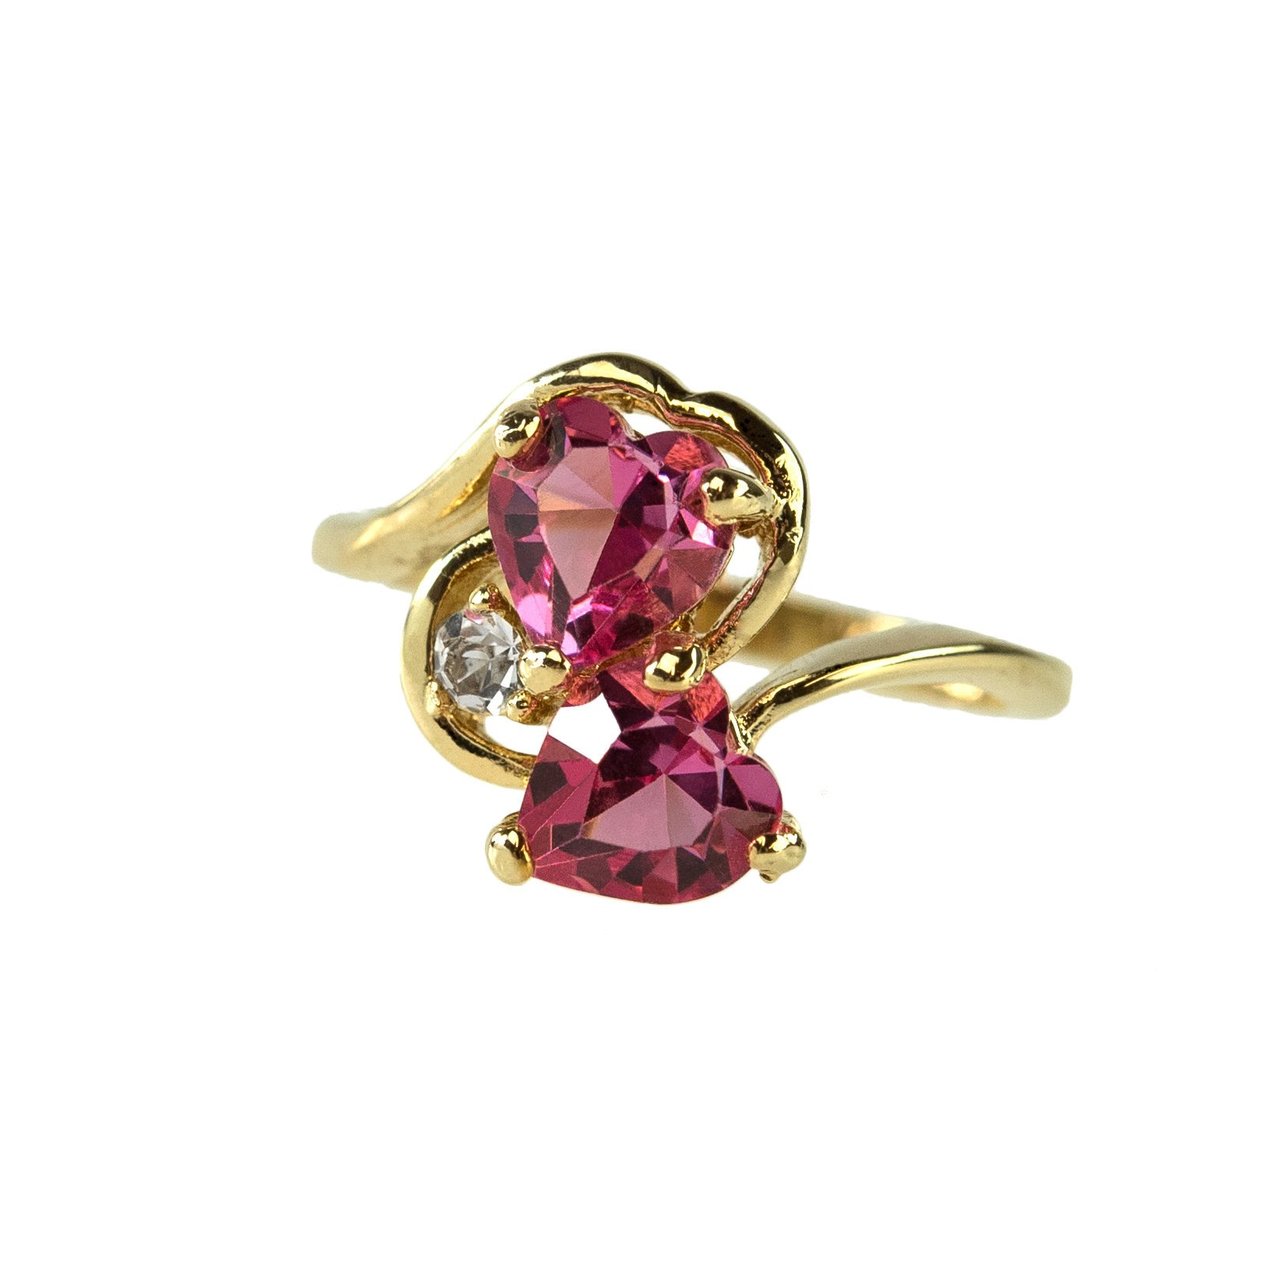 Vintage Ring Ruby Swarovski Crystal Double Heart Ring 18k Gold Antique Womans Handmade Jewelry R2342 by PVD Vintage Jewelry